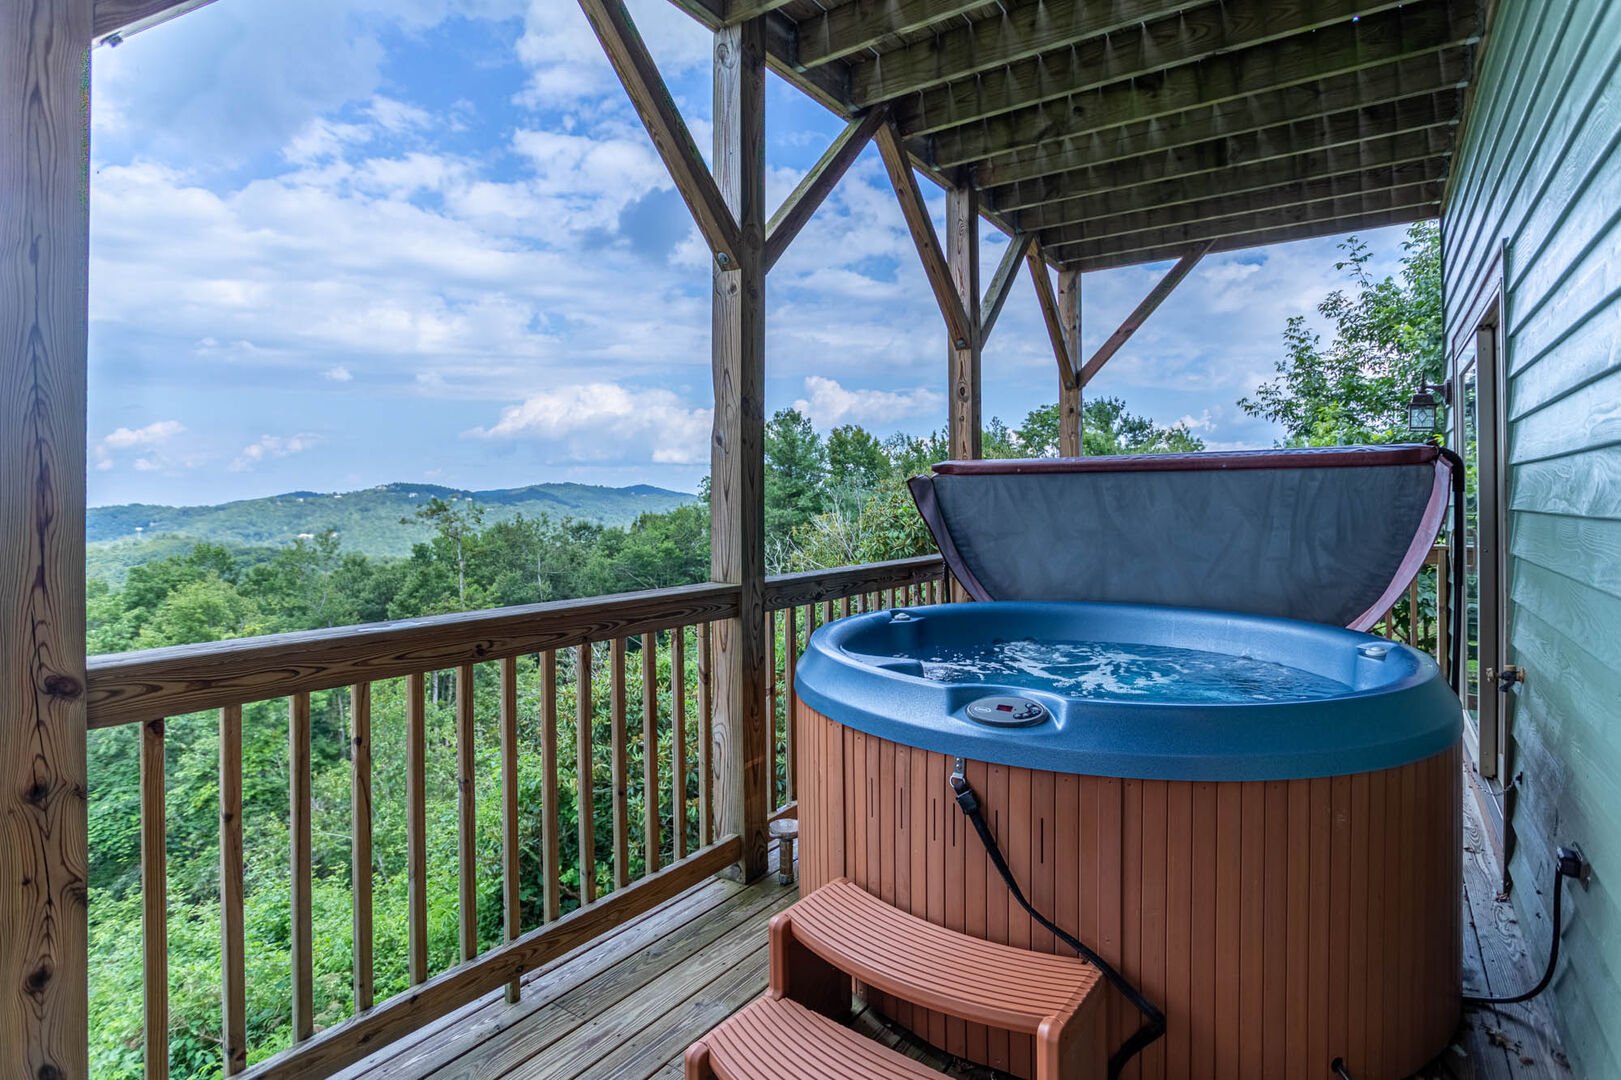 1 Amazing View Blue Ridge Mountain 3 Bedroom Vacation Home Rental Blowing Rock NC with Hot Tub